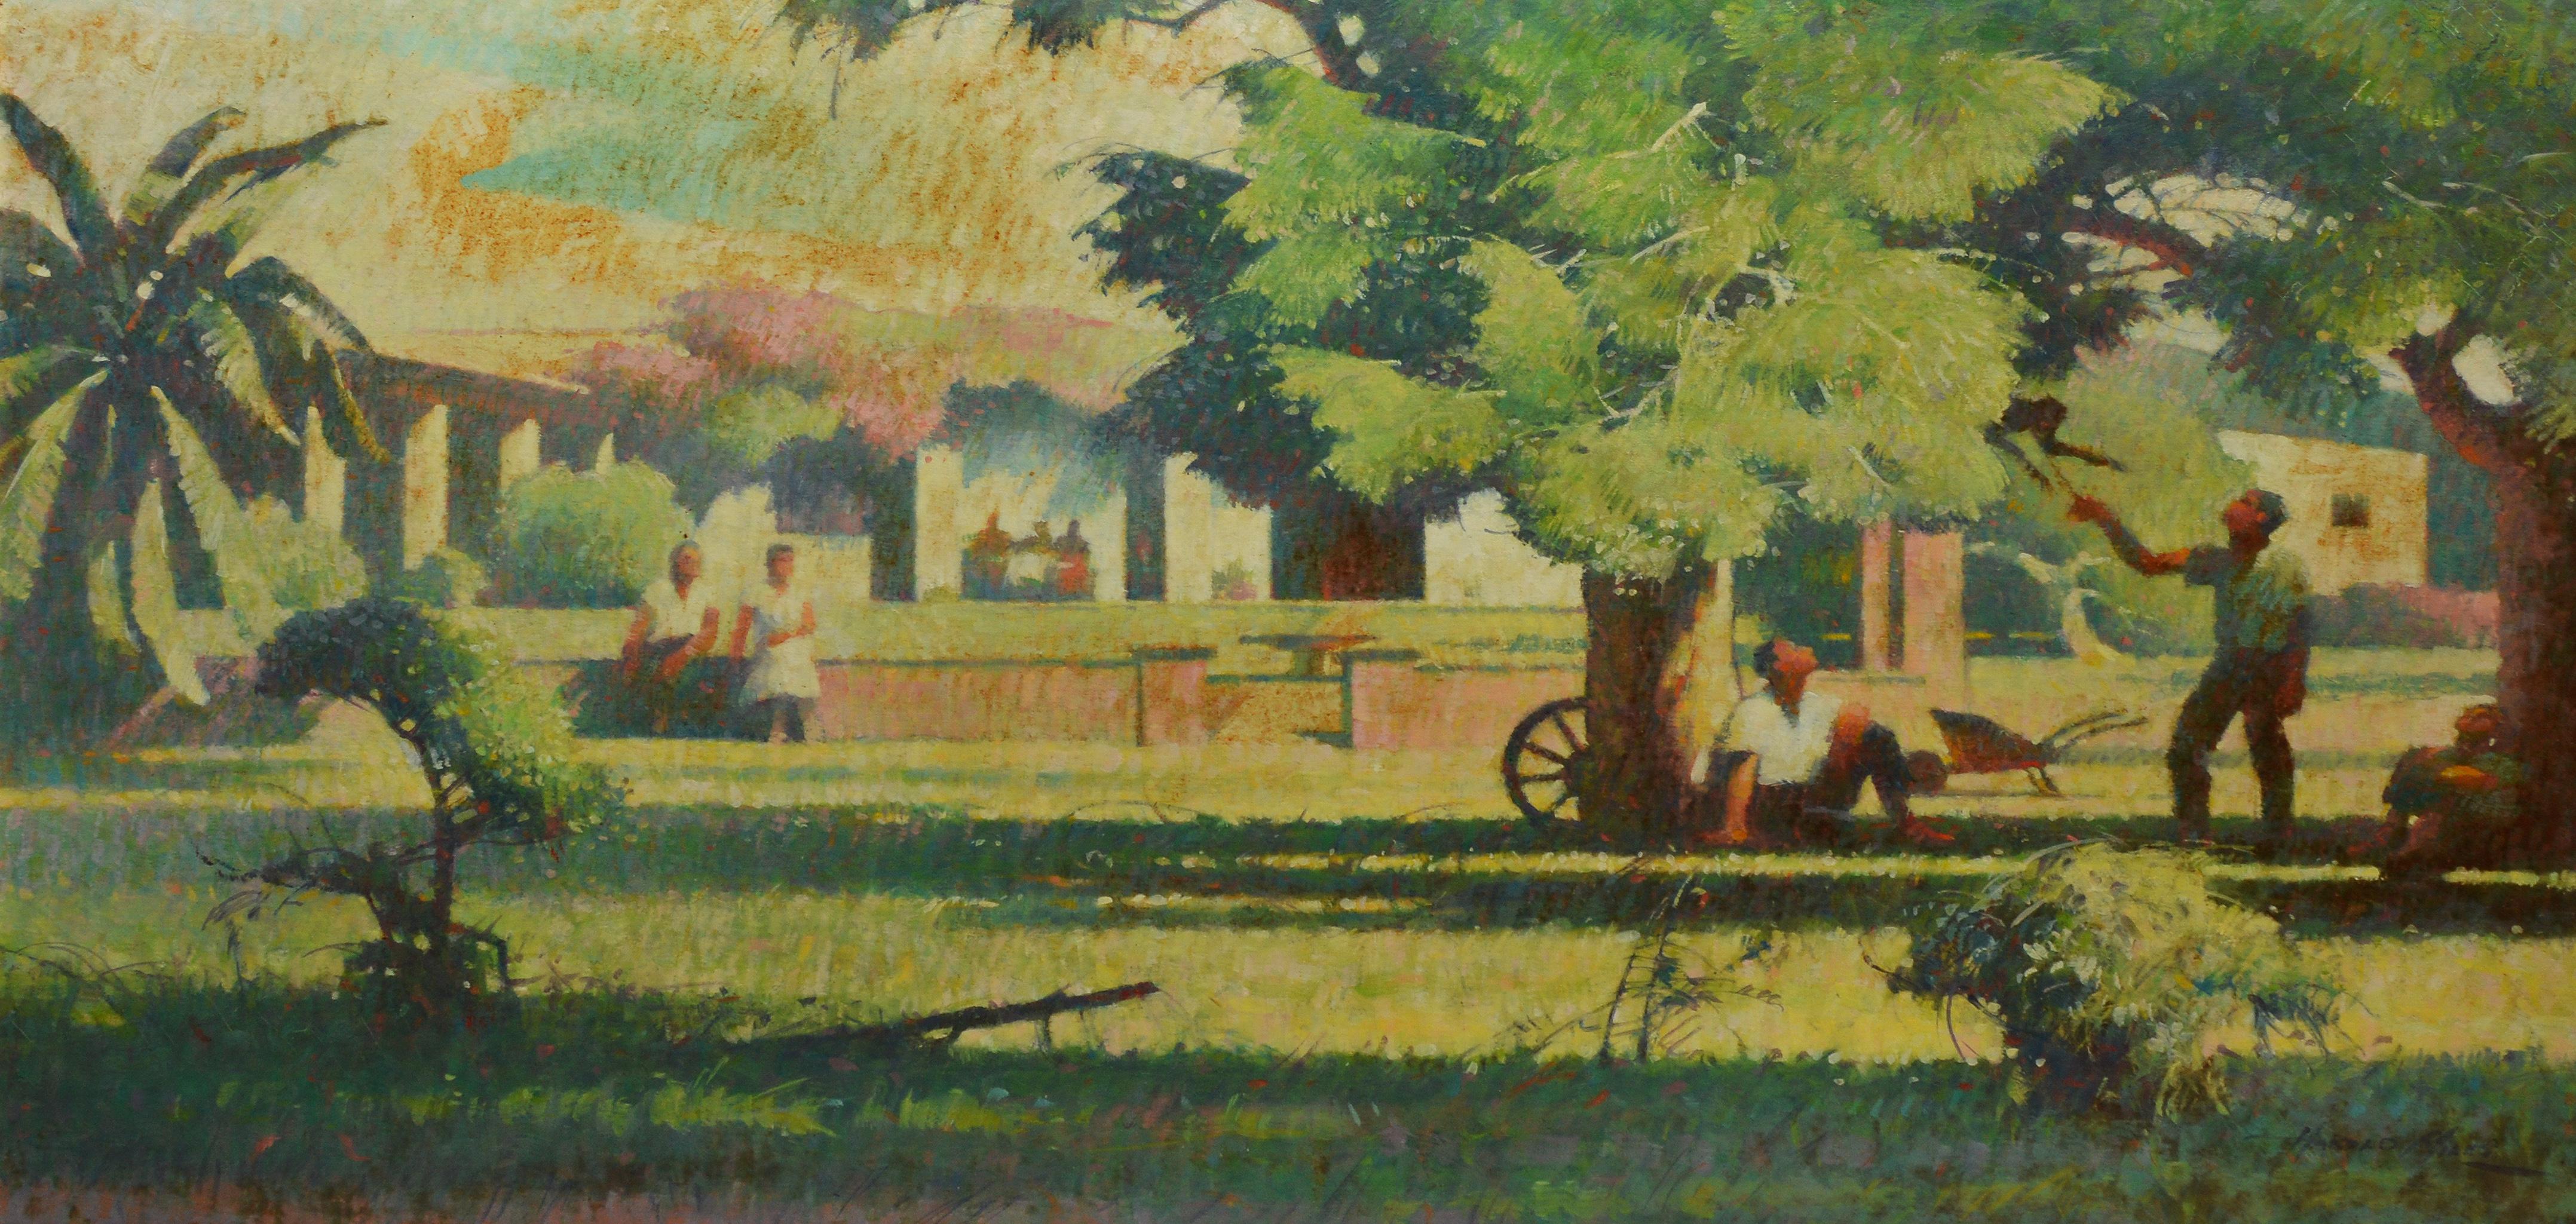 Vintage modernist California farm landscape painting by Harold W. Miles  (1887 - 1963).  Oil on canvas, circa 1930.  Signed.  Displayed in a period modernist frame.  Image, 36